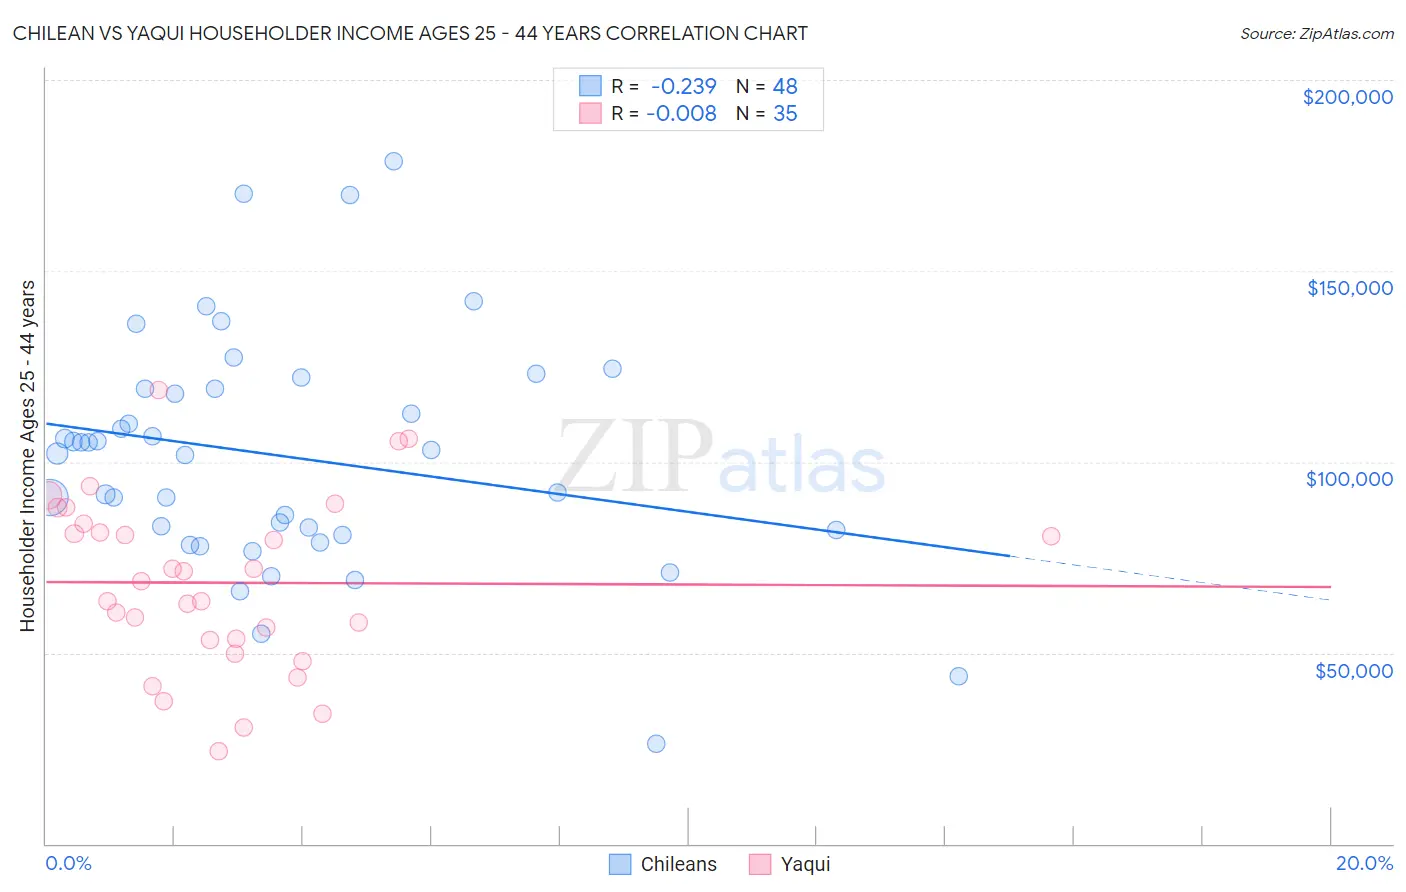 Chilean vs Yaqui Householder Income Ages 25 - 44 years